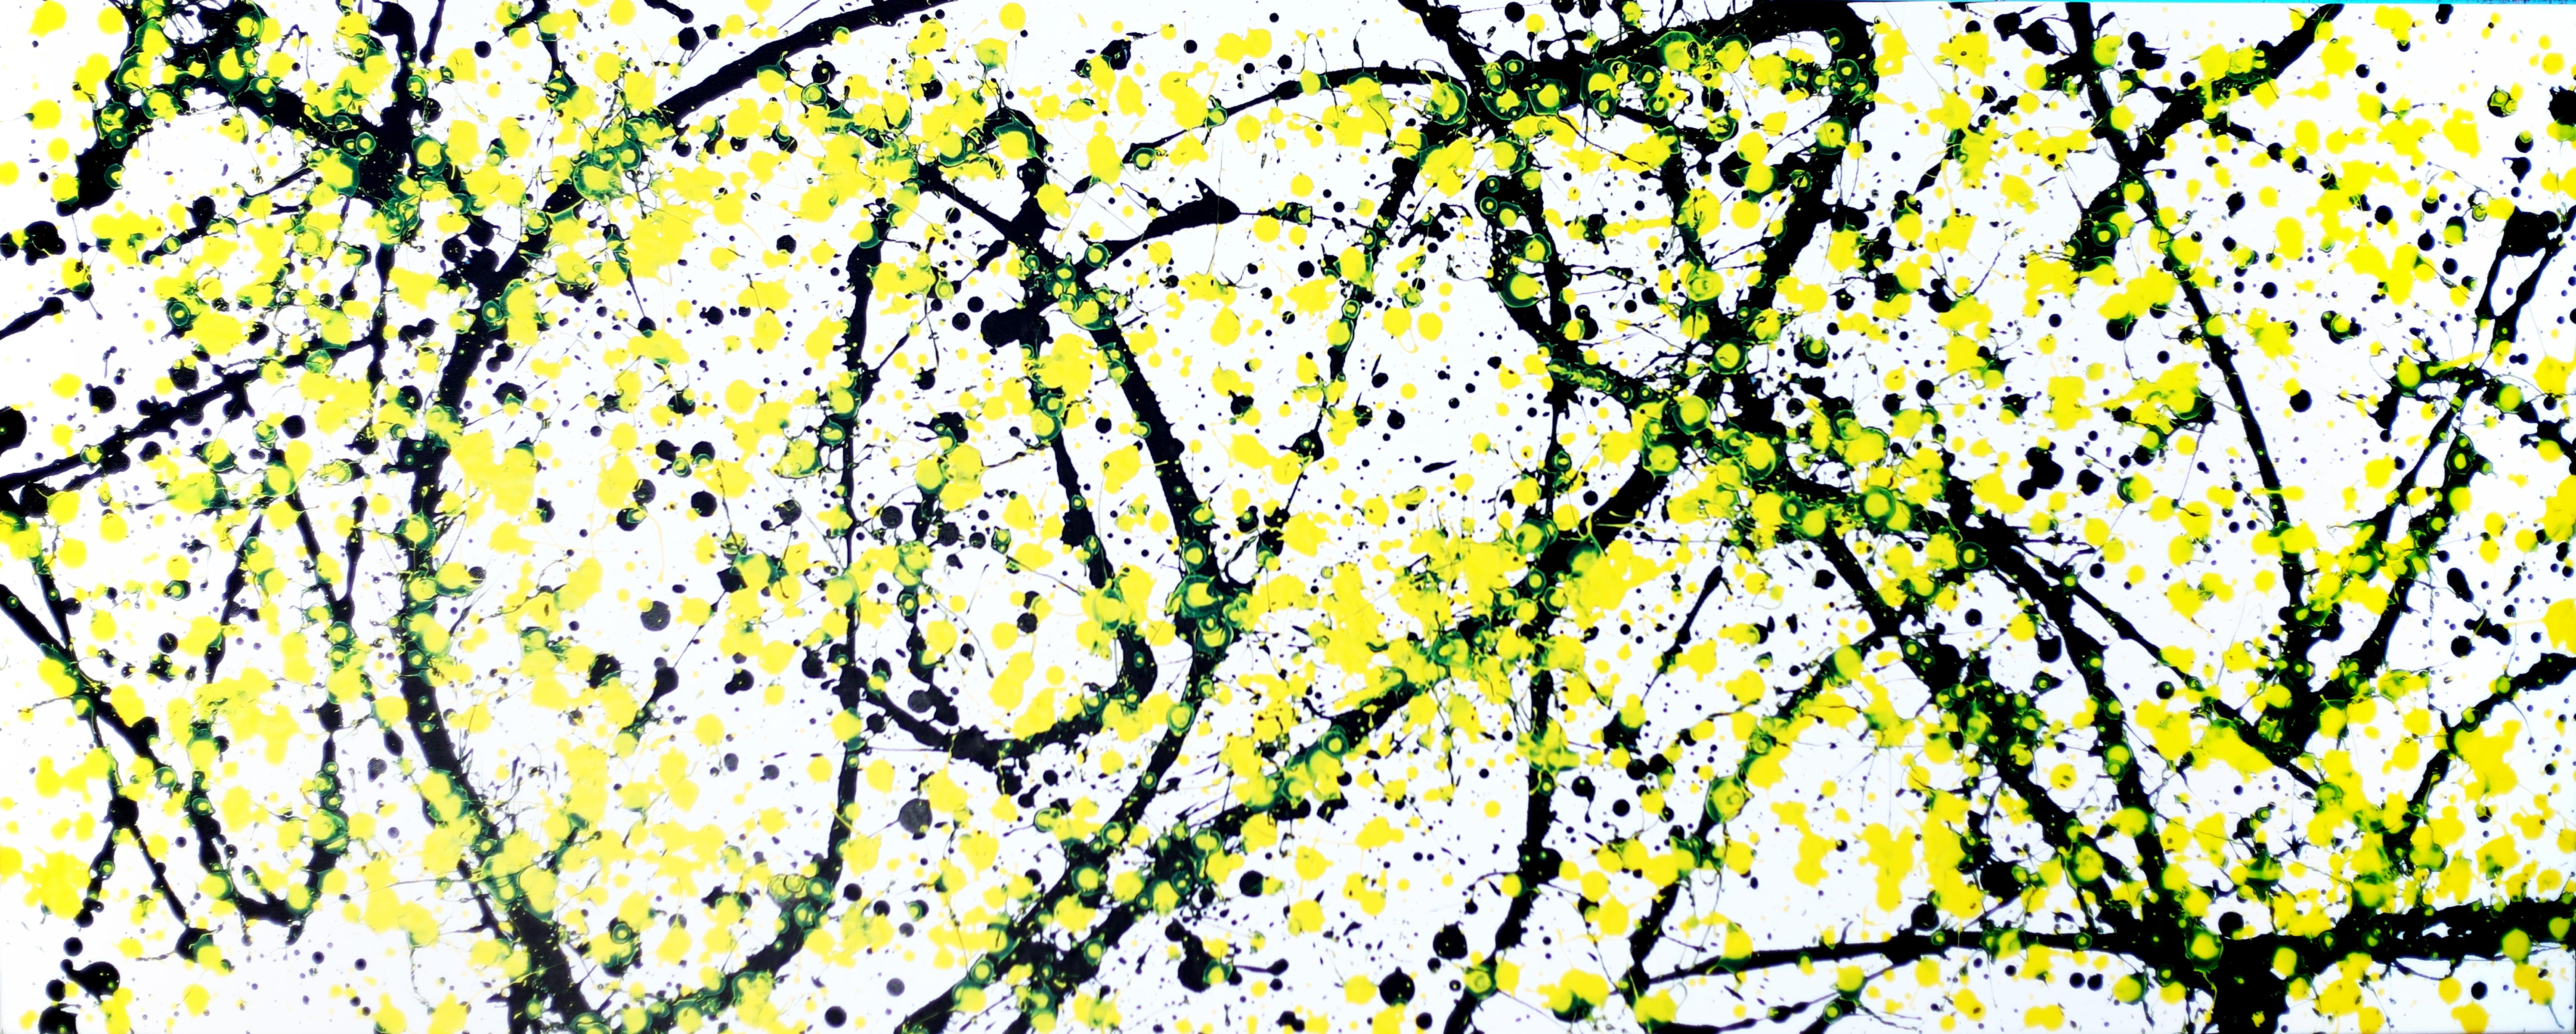 This painting the emotional essence of Springtime, the feeling and the sense of what Spring is about. In an abstract sense, I use the constrast between yellow and black on white to give the emotions, I relate to Spring. This work is painted in the